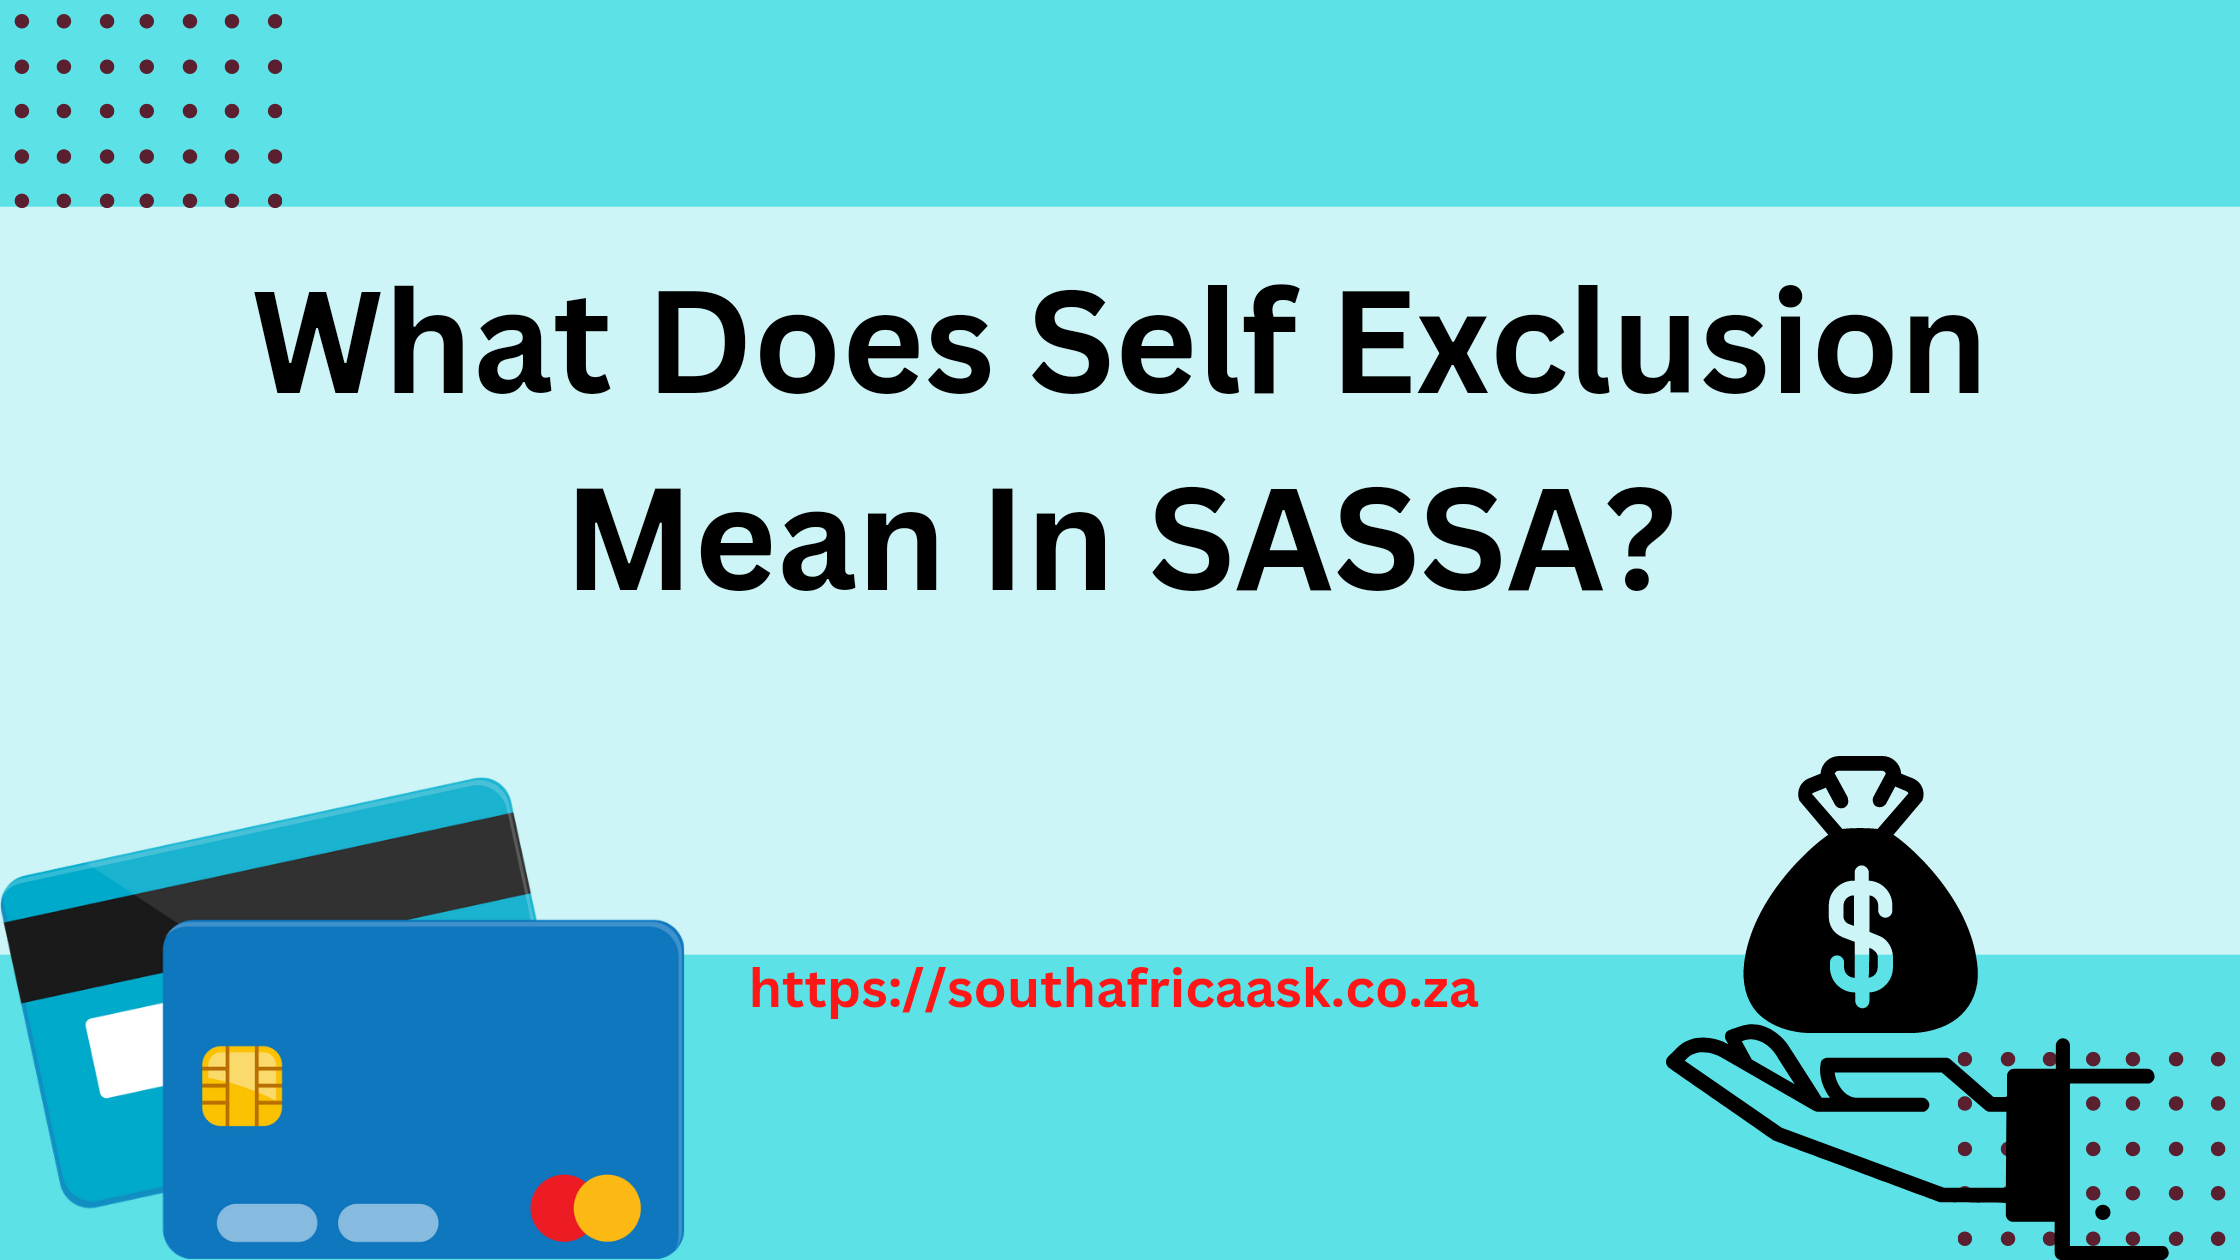 What Does Self Exclusion Mean In SASSA?